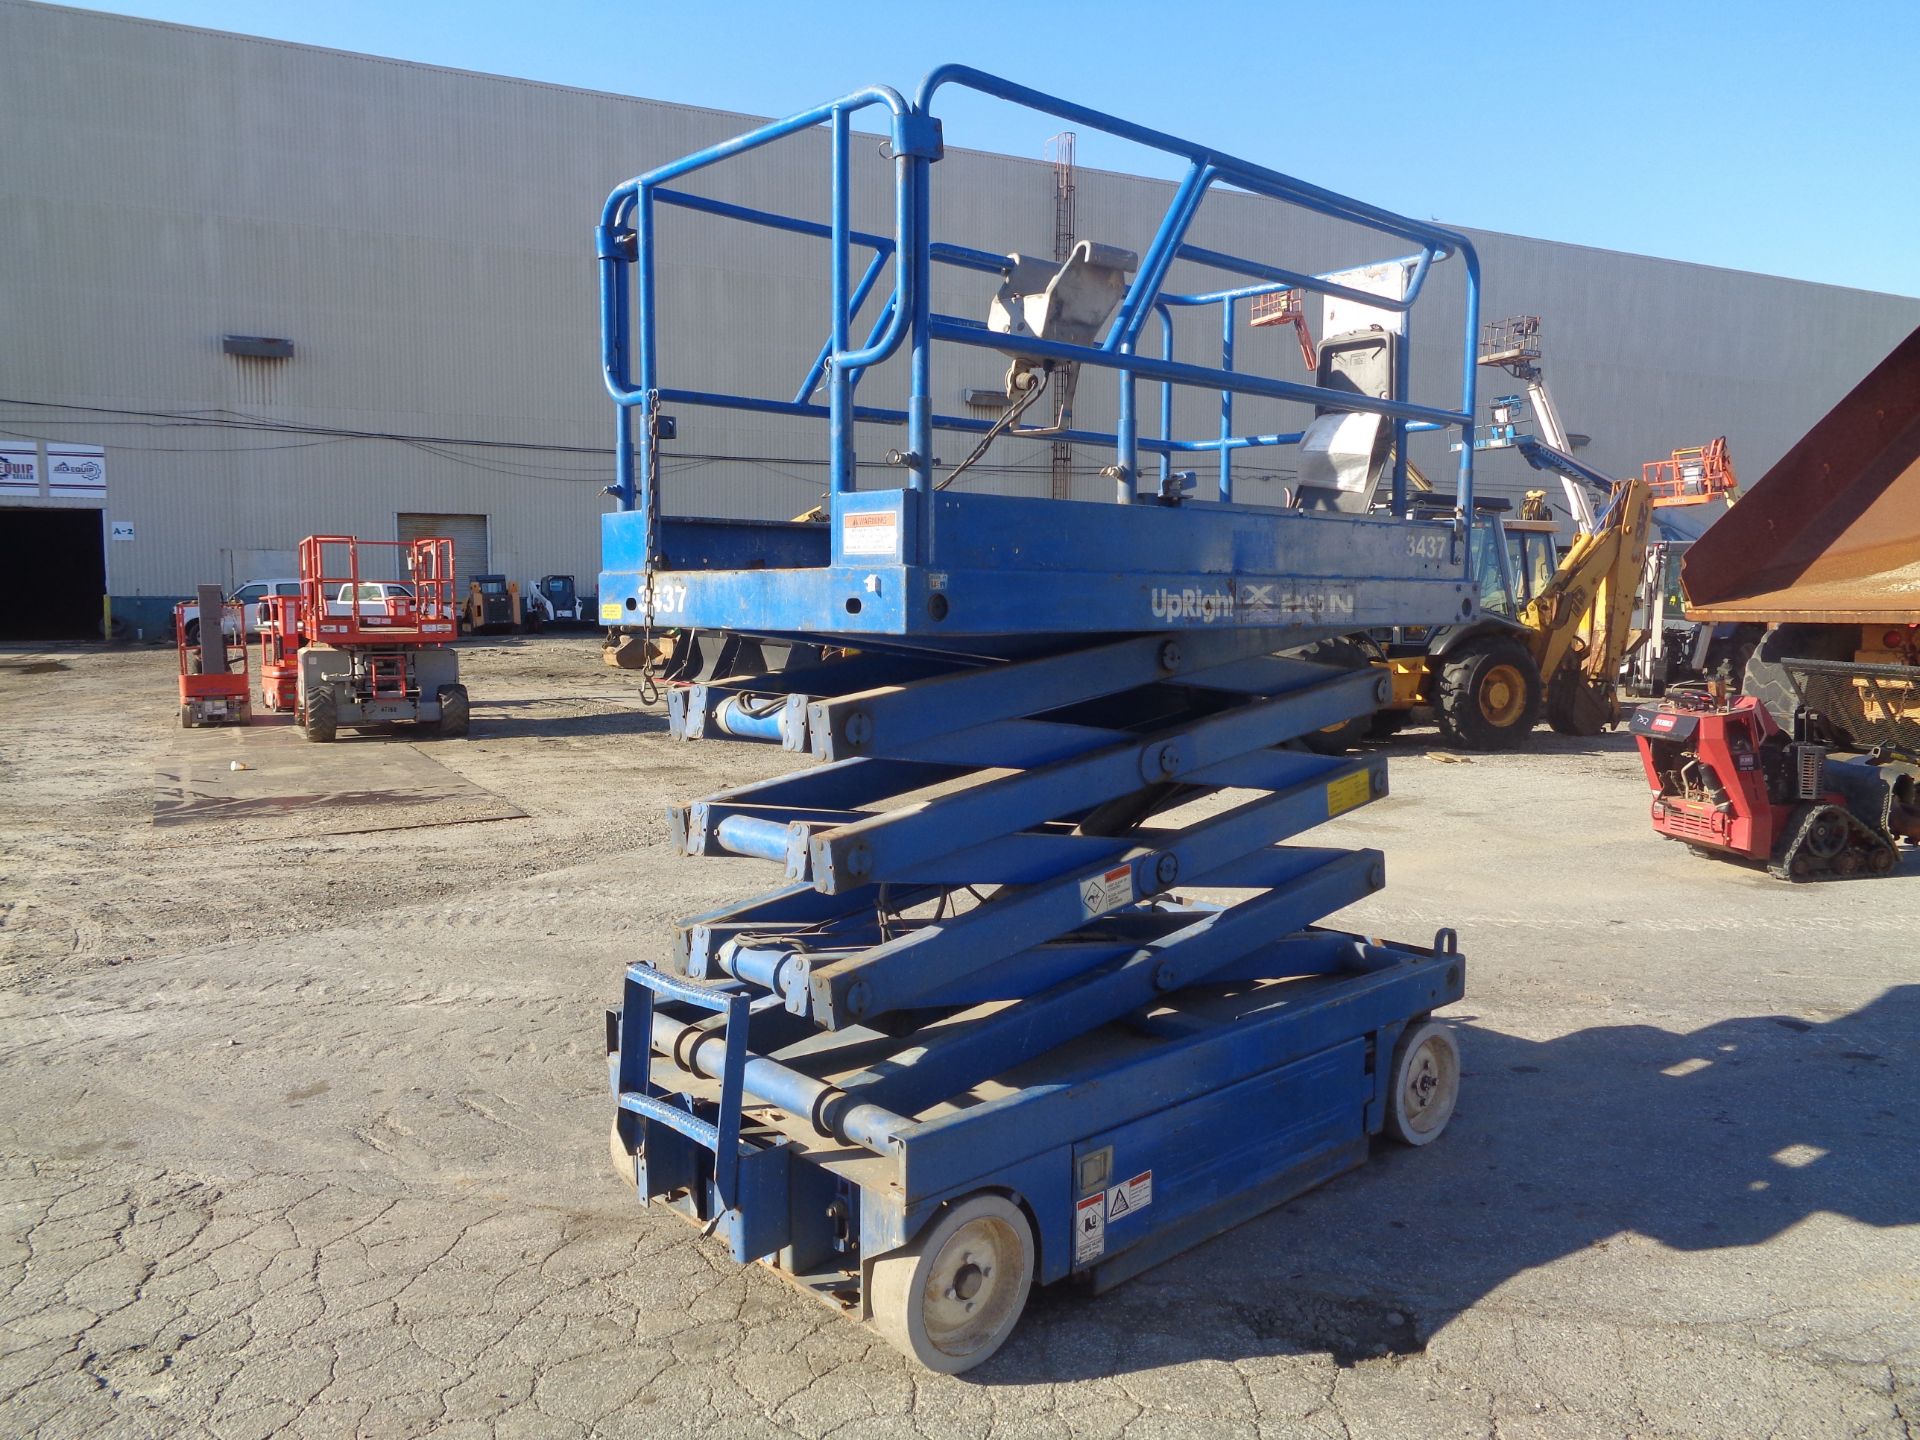 2000 UpRight X26N Scissor Lift - 26Ft Height - Image 13 of 27